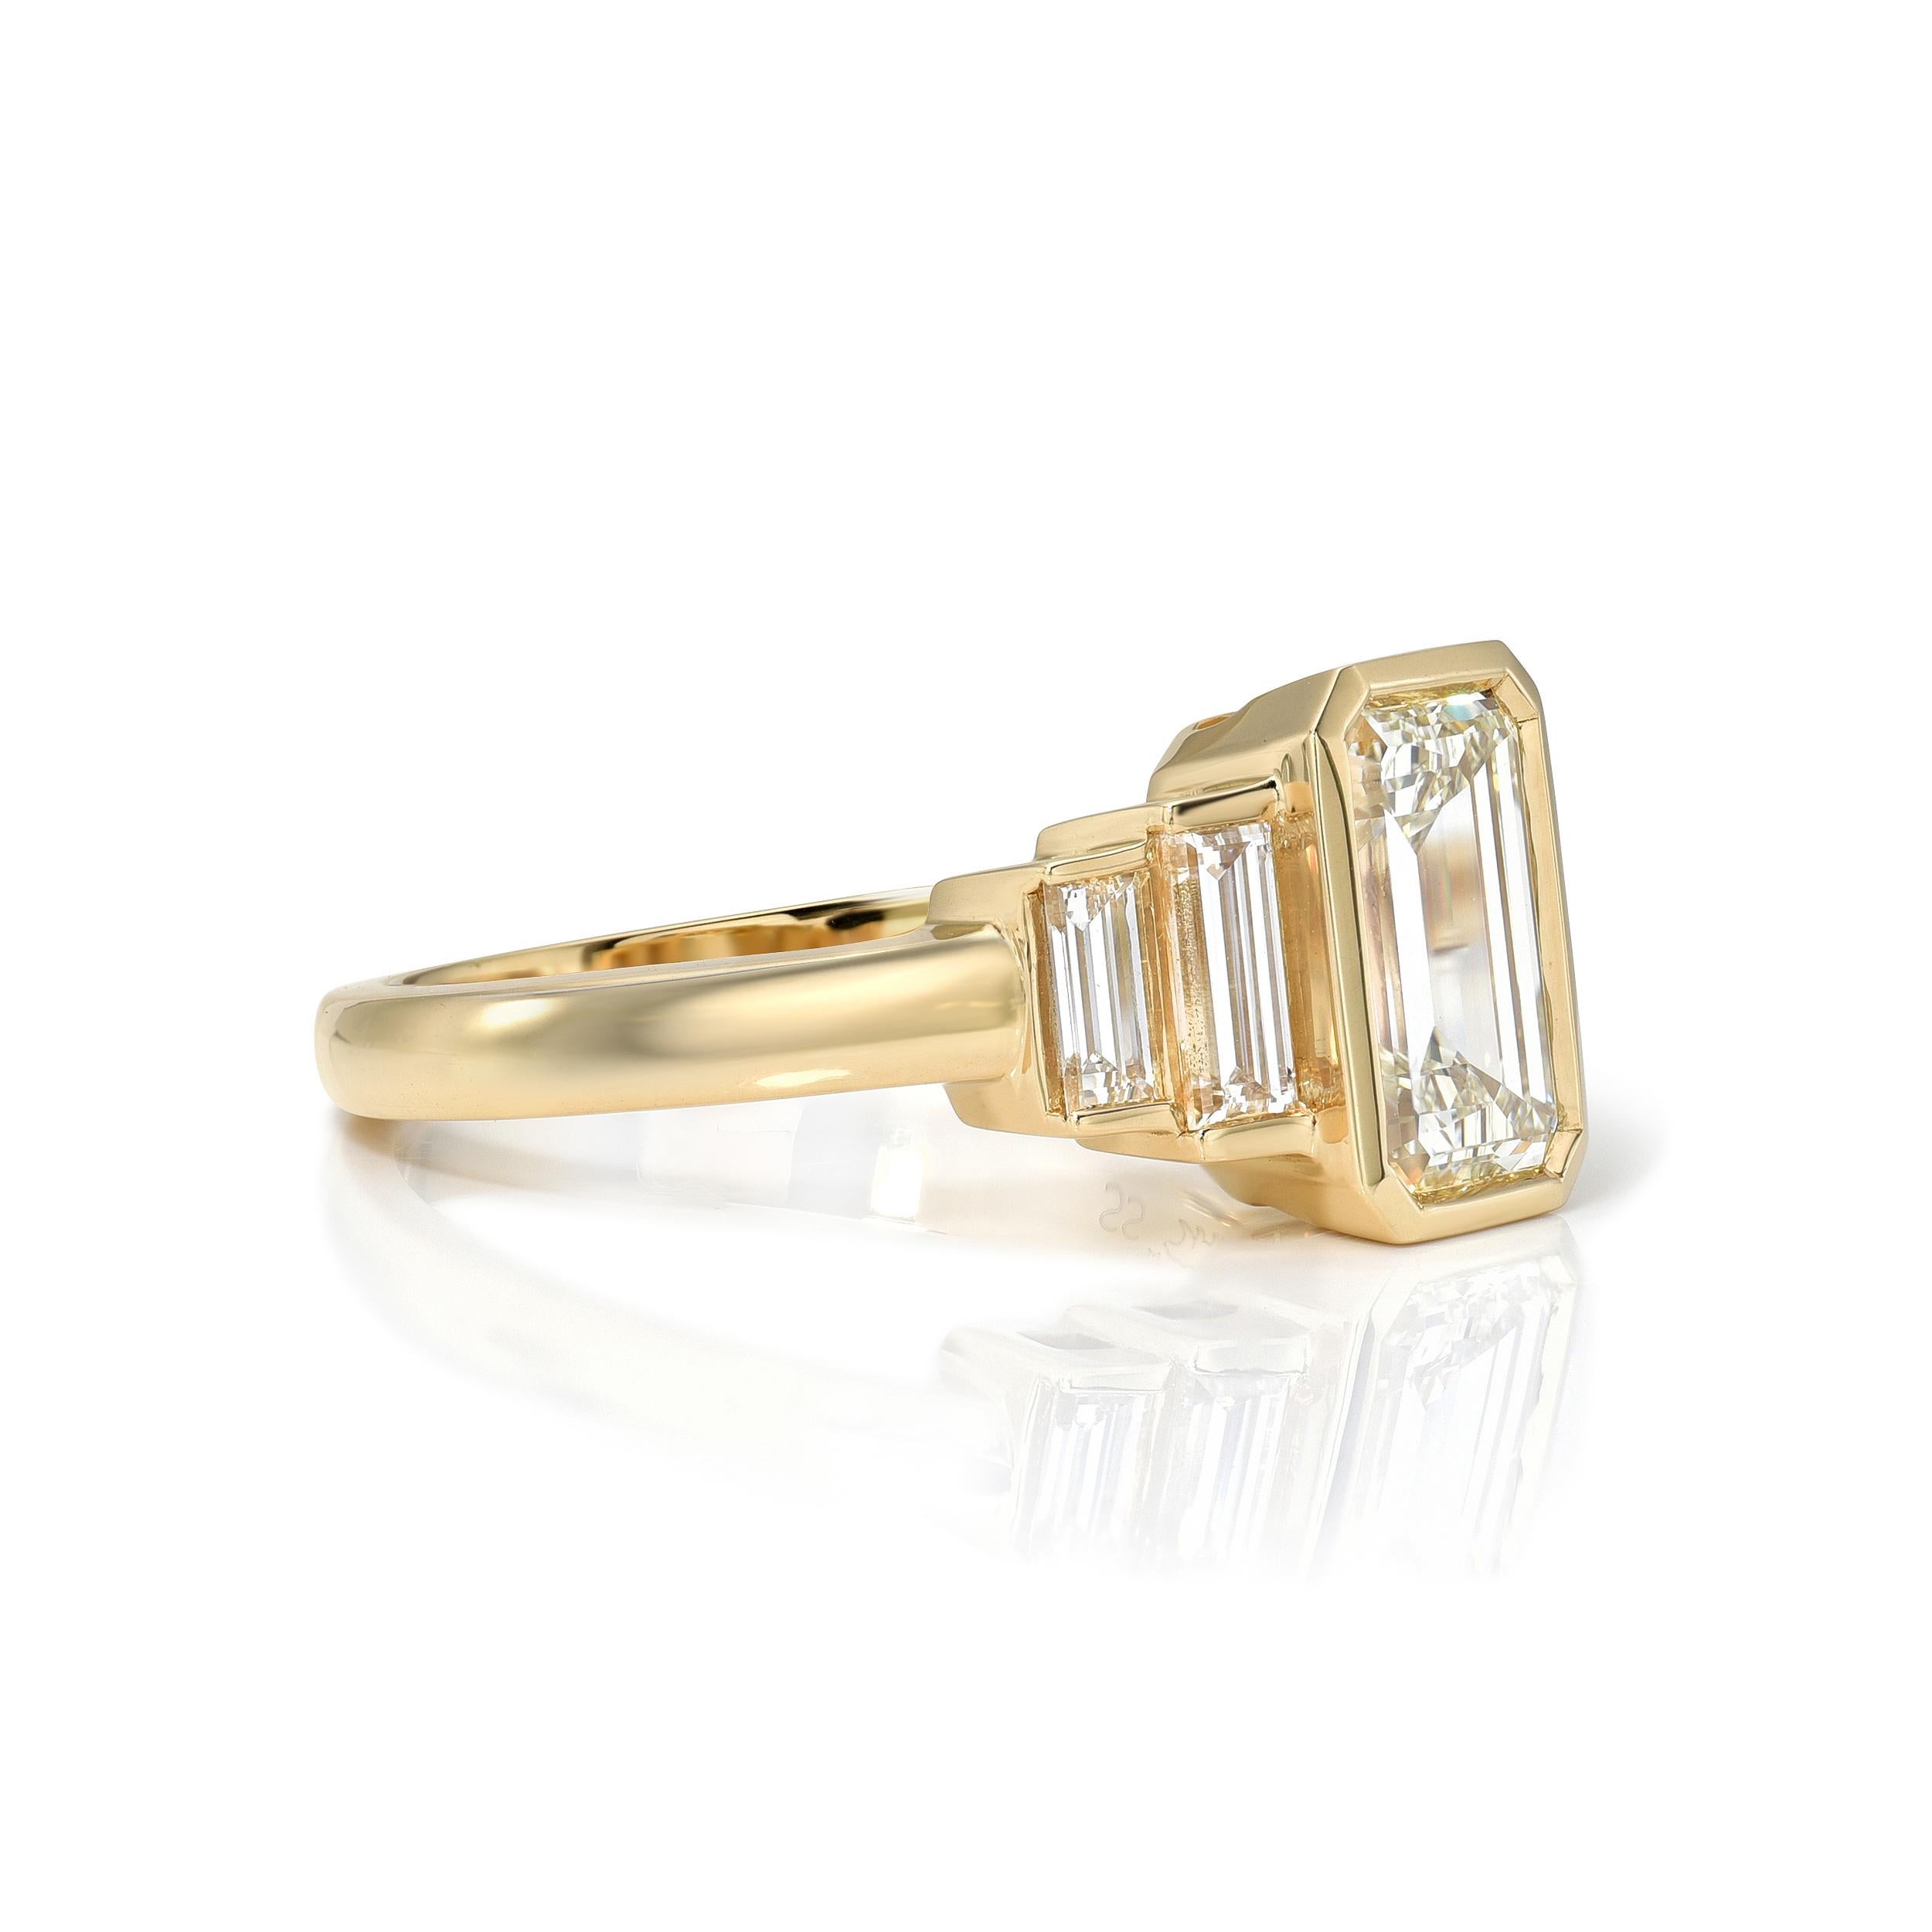 1.52ct L/IF GIA certified emerald cut diamond with 0.58ctw baguette cut accent diamonds bezel set in a handcrafted 18K yellow gold mounting.